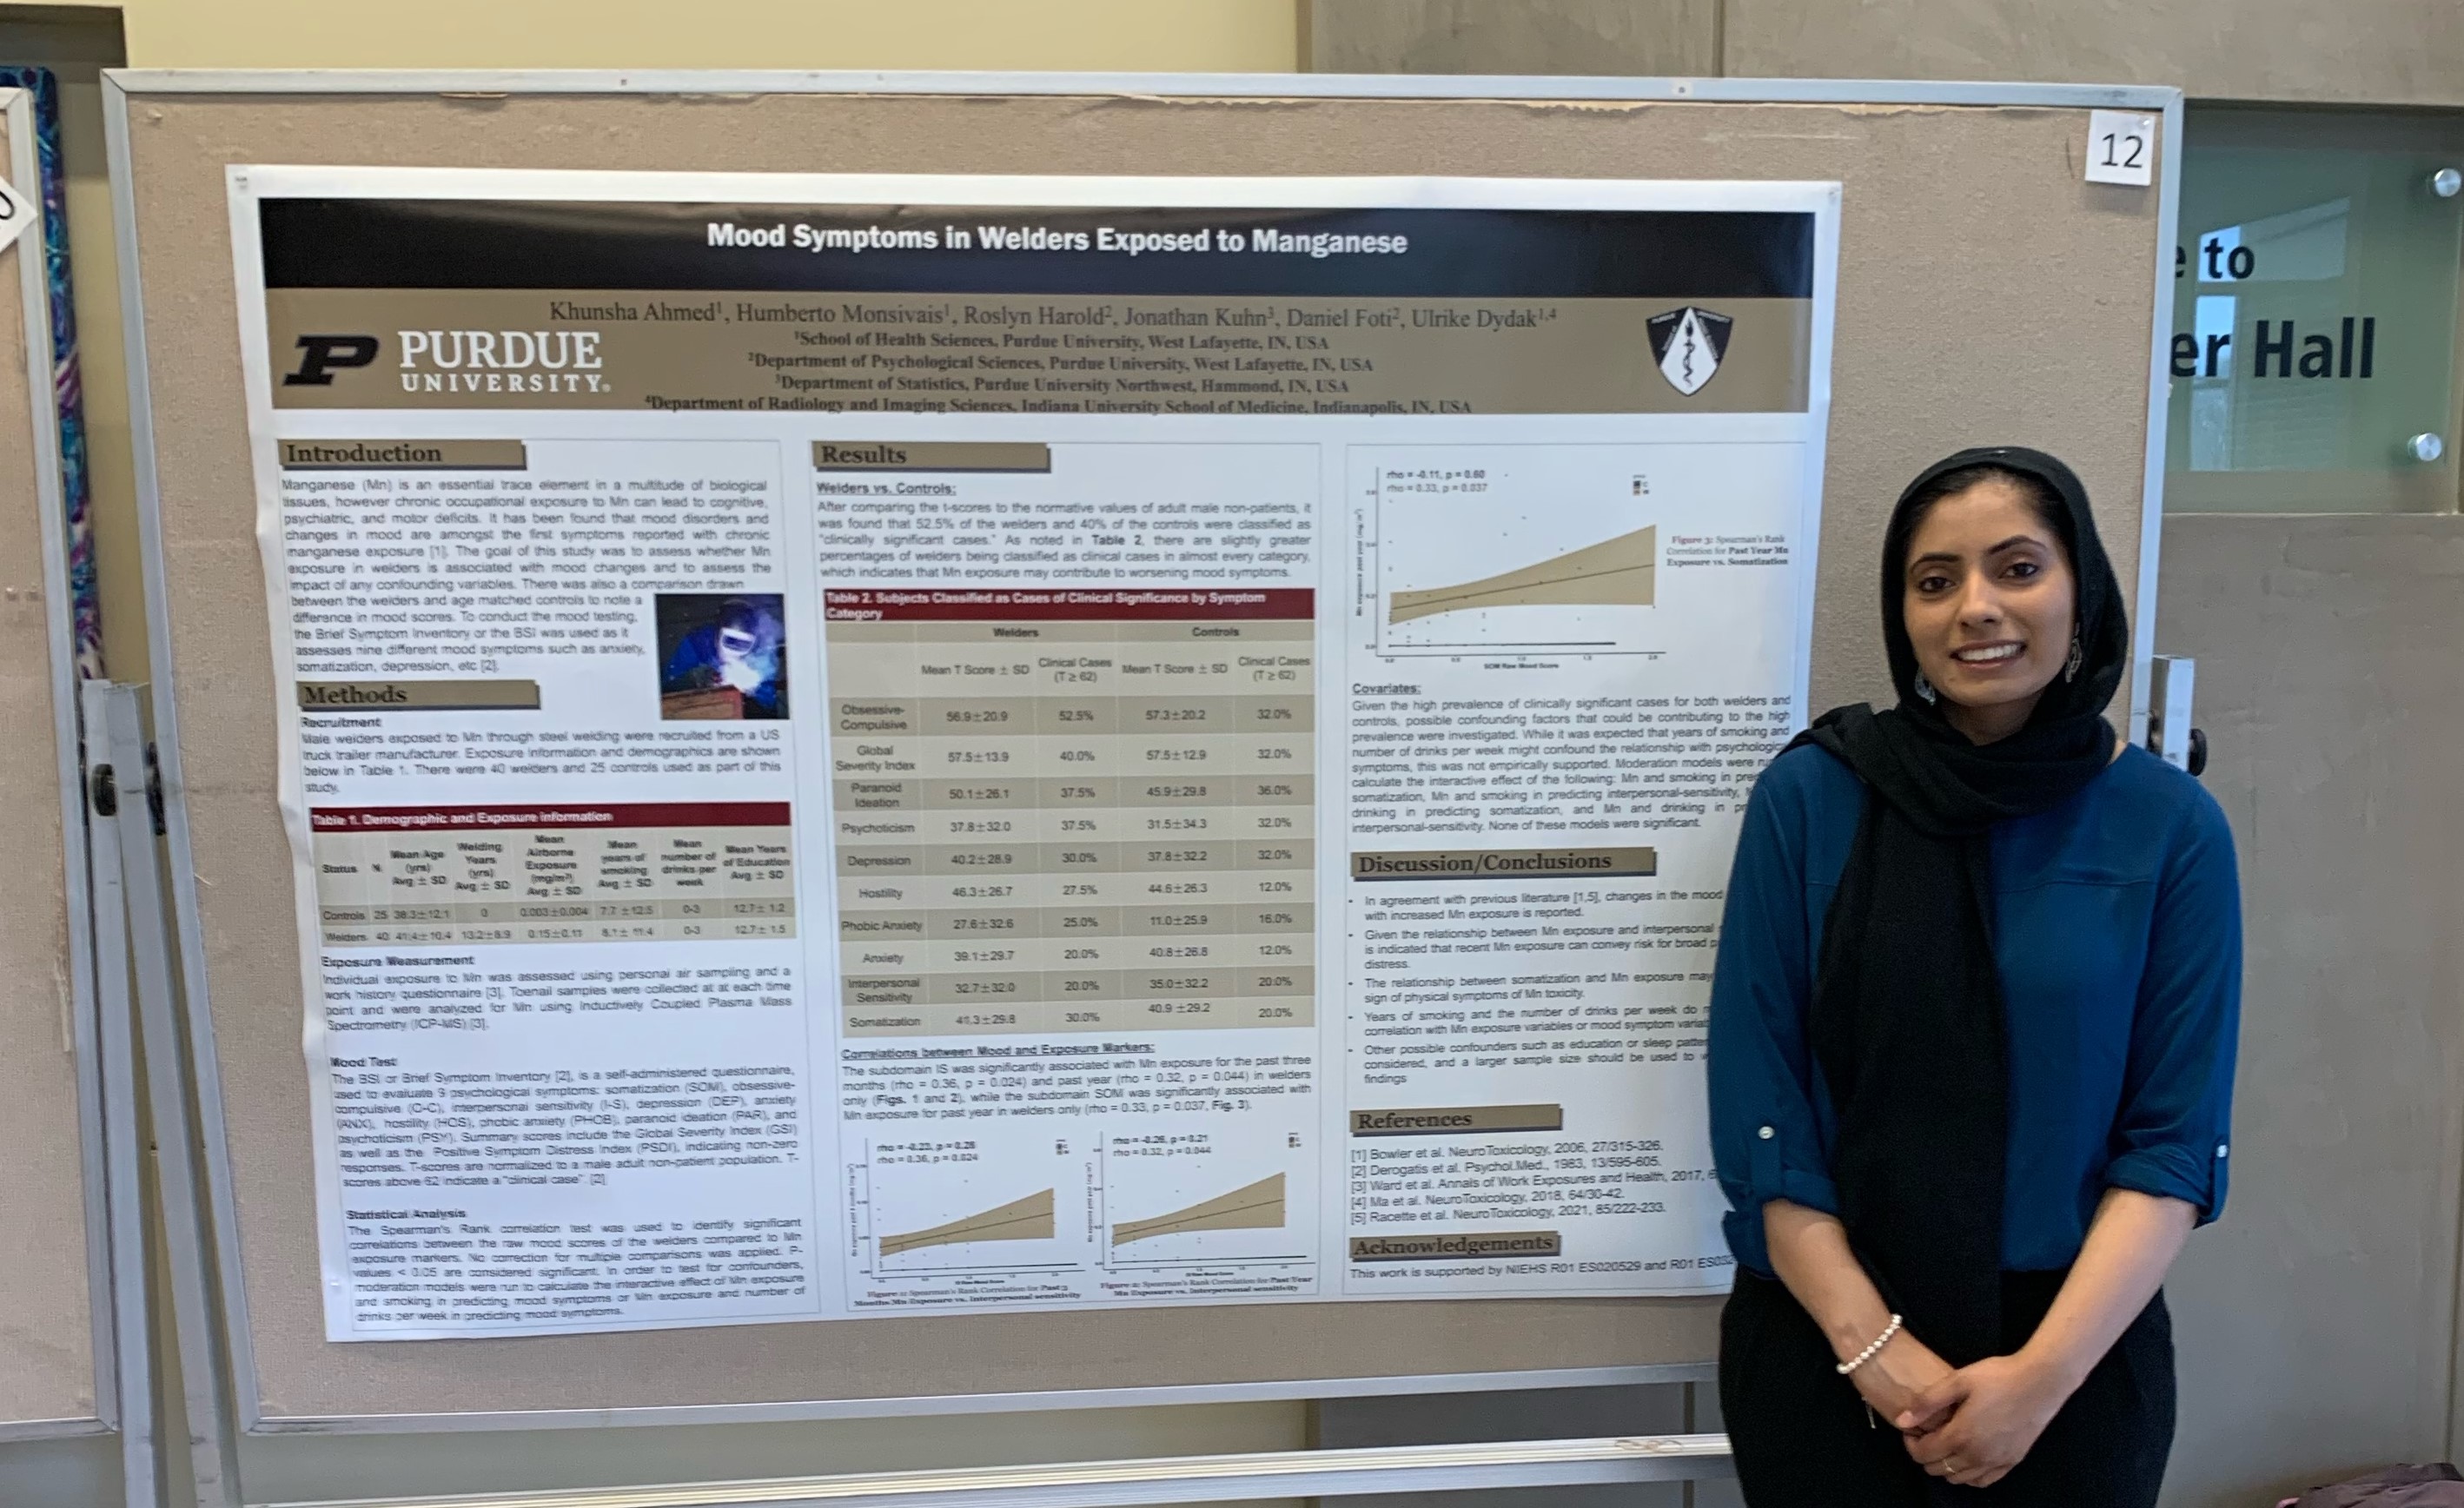 Photo of Khunsha Ahmed and her poster she presented.